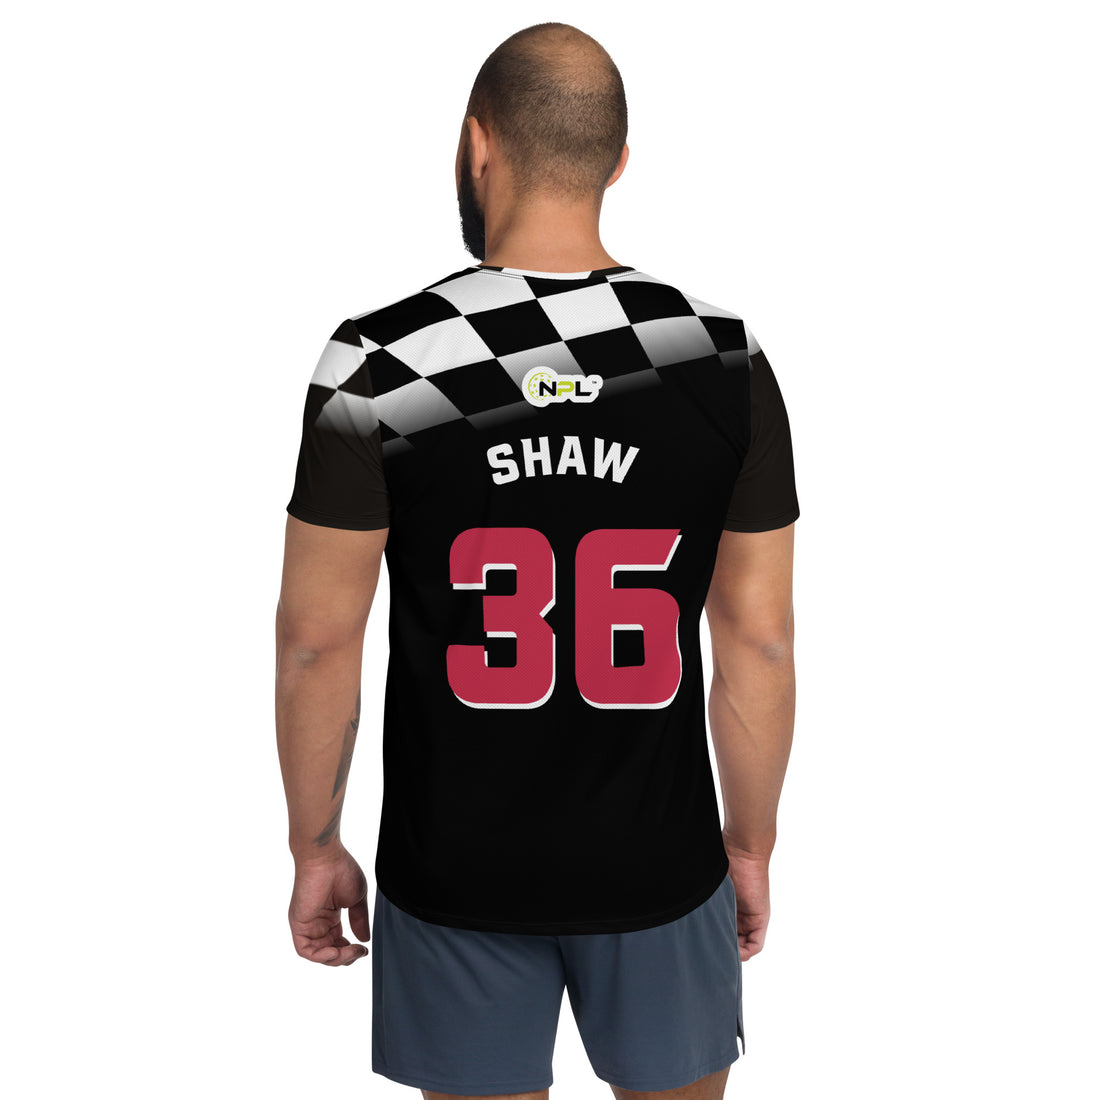 NATALIE TODORIOVIC-SHAW 36 INDY DRIVERS™ SKYBLUE 2023 AUTHENTIC Fan JERSEY - BLACK